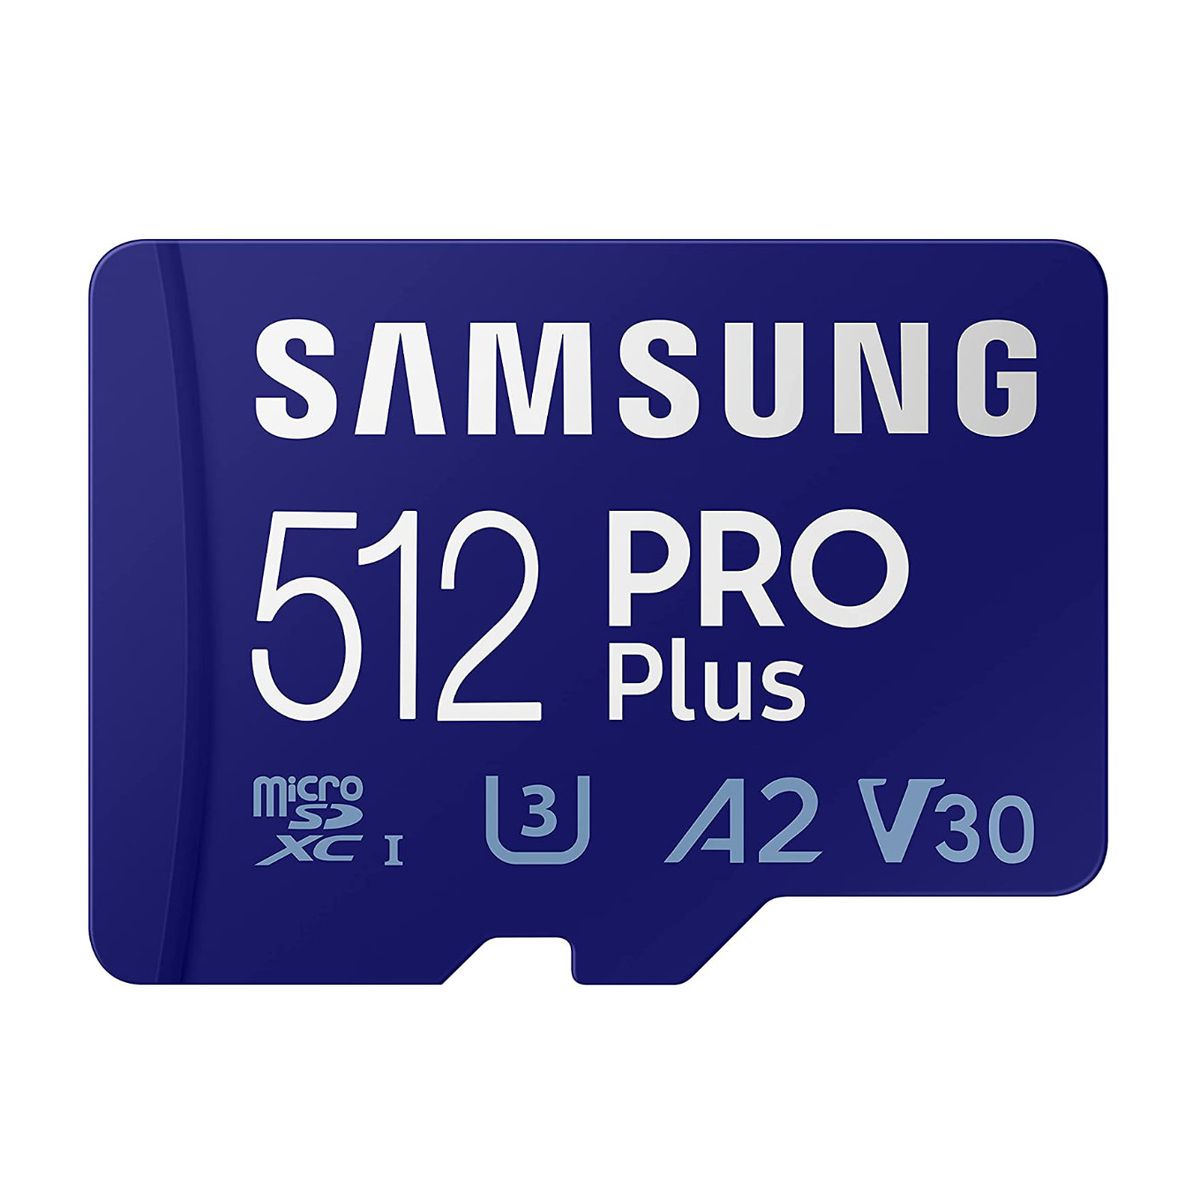 Samsung’s 512 GB microSD card has reached its lowest price ever